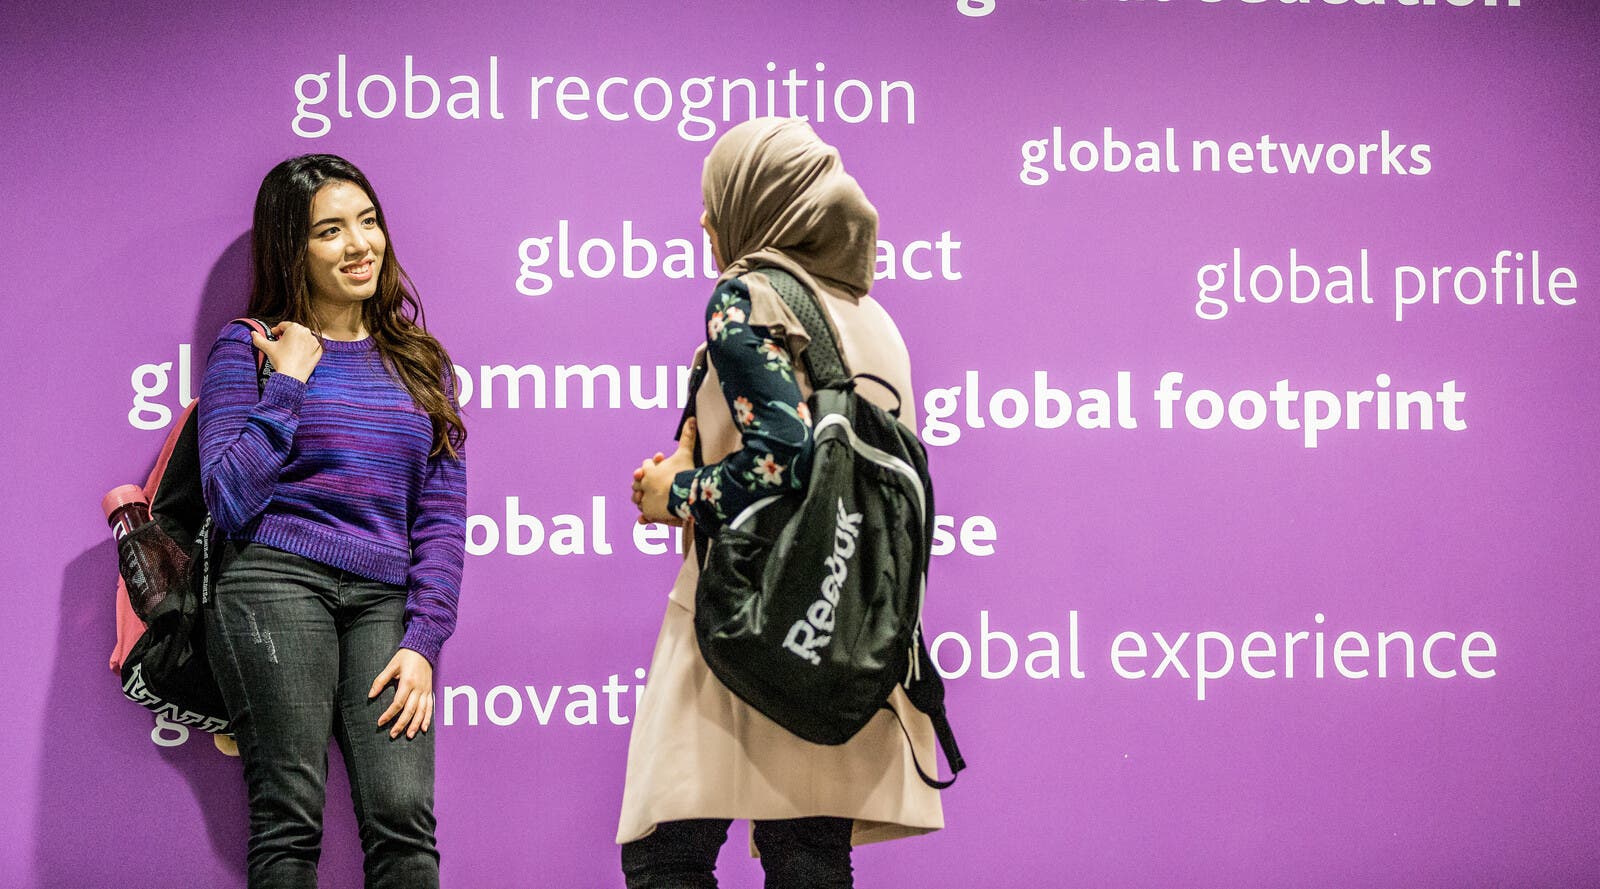 Two international students in front of a bright, purple wall